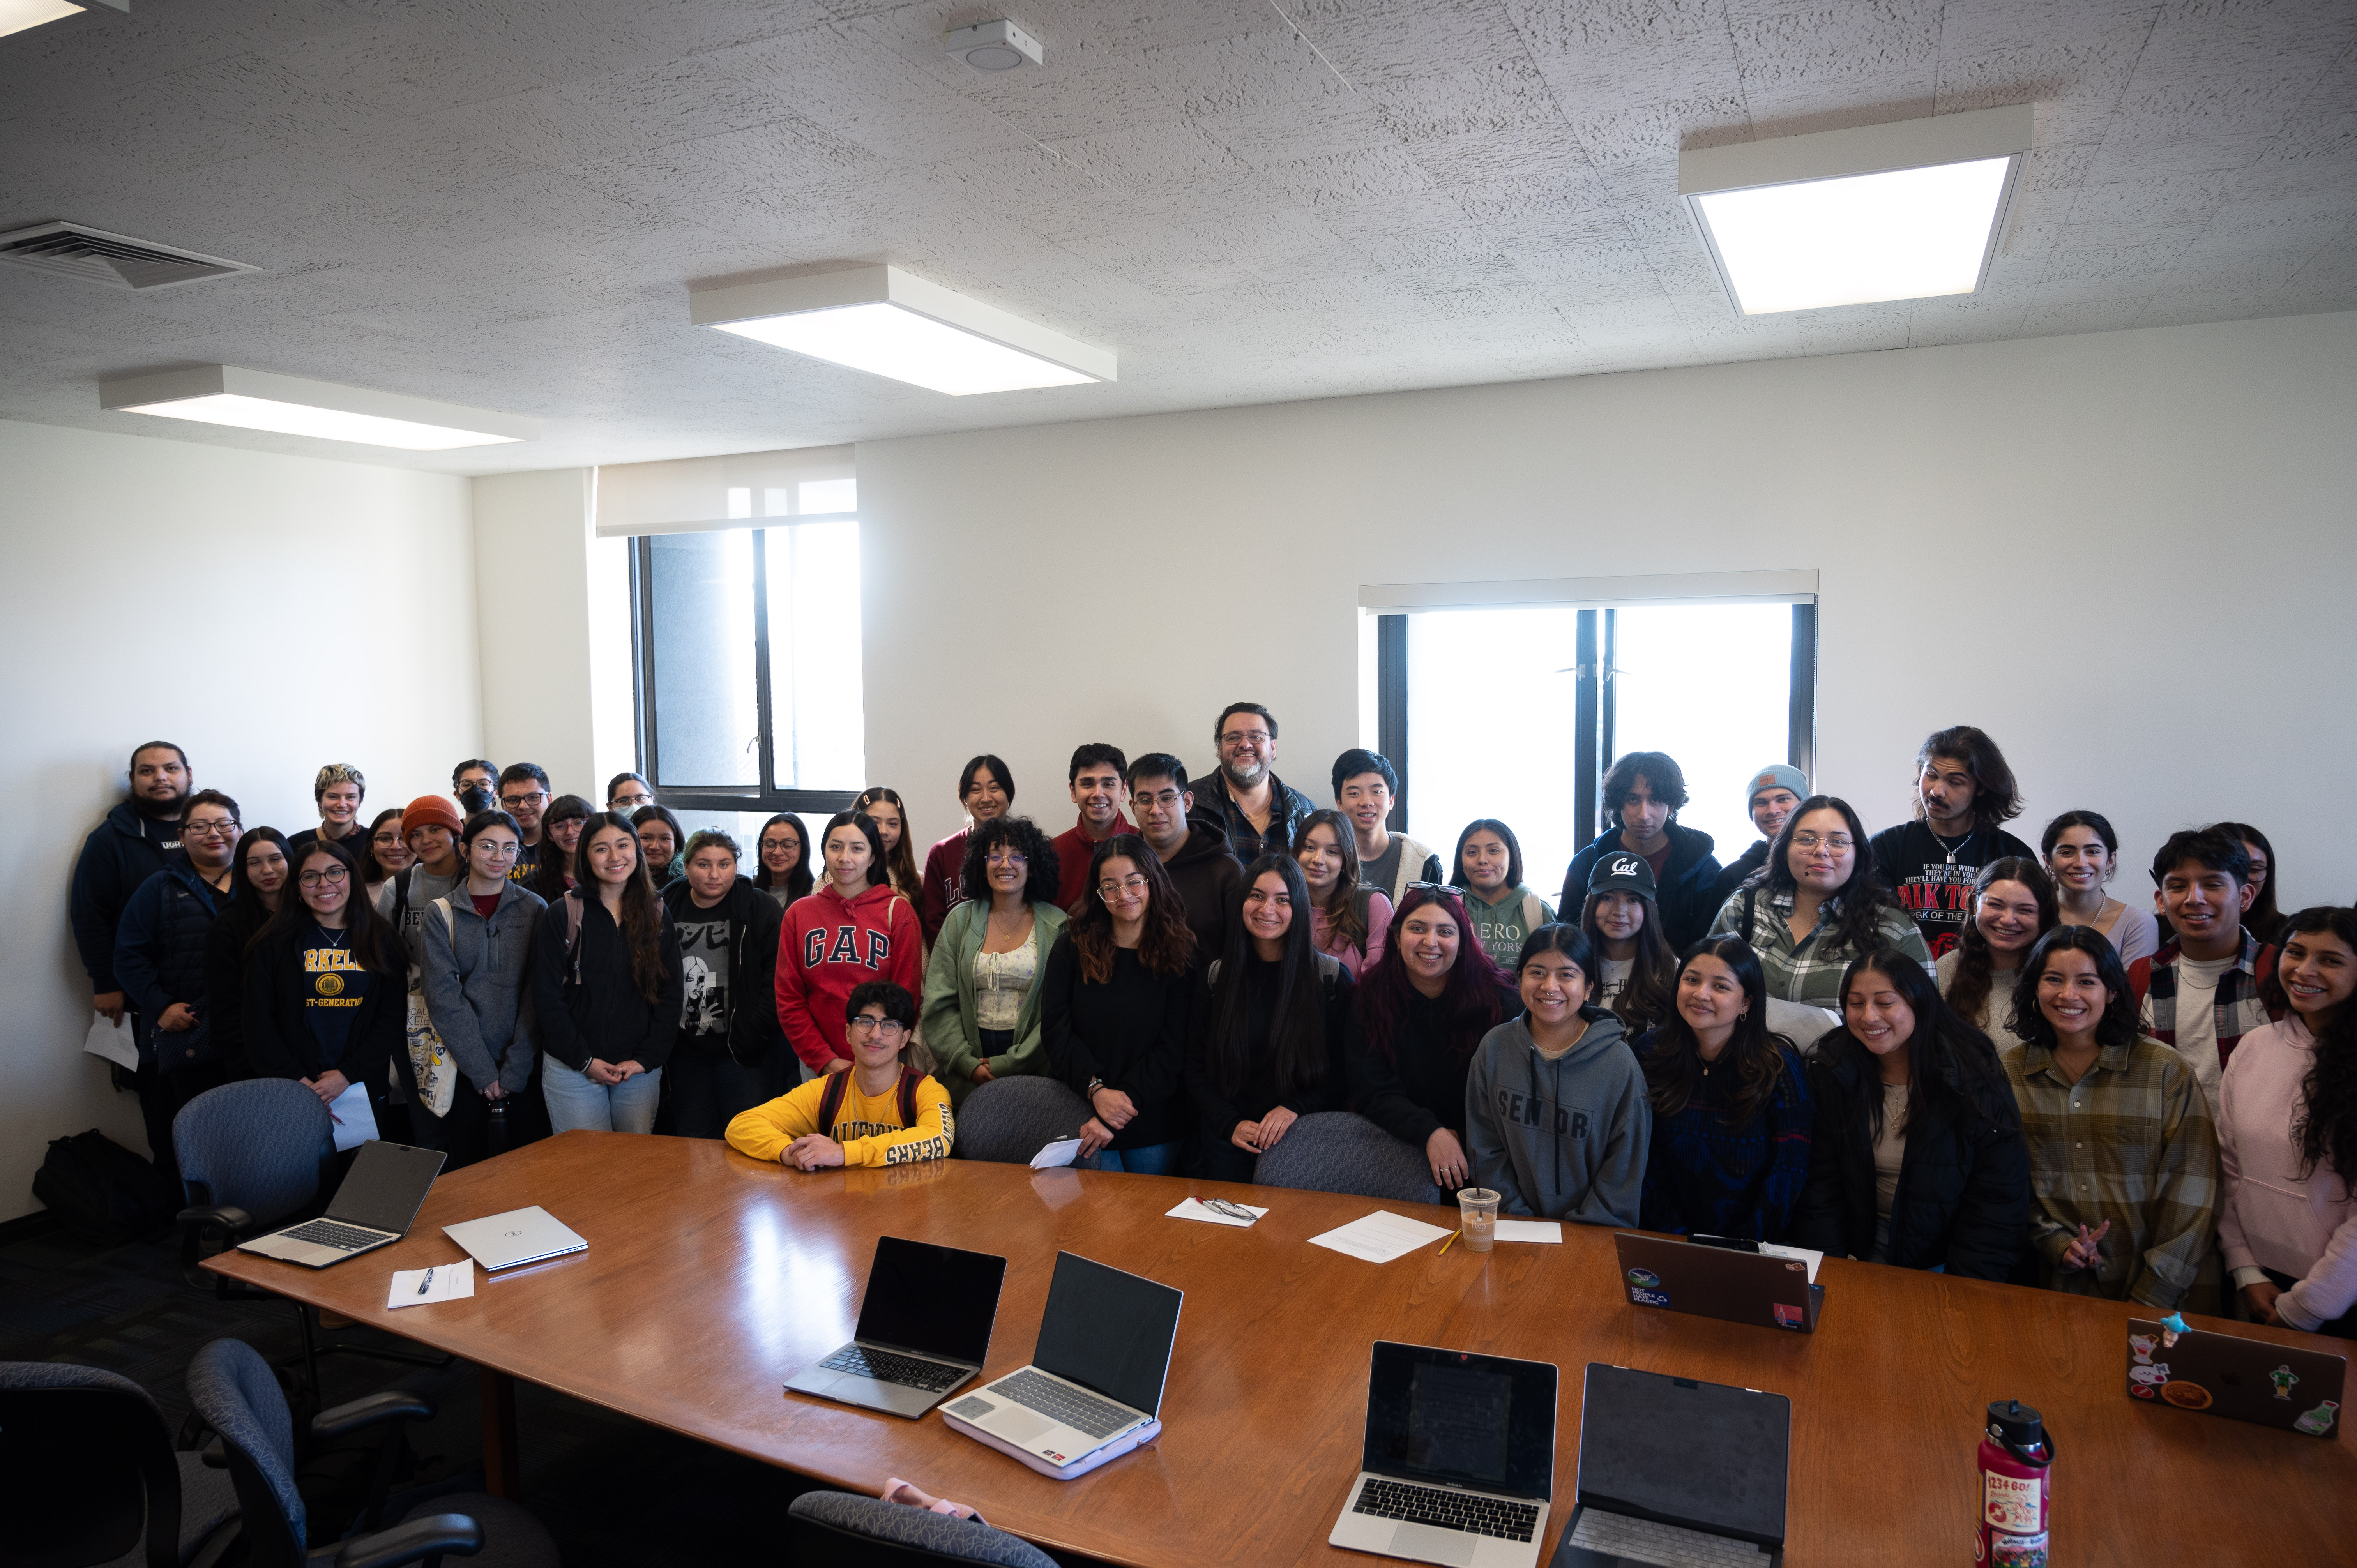 A group of around 40 students pose with Pablo Gonzalez in a cramped room with a long brown conference table.